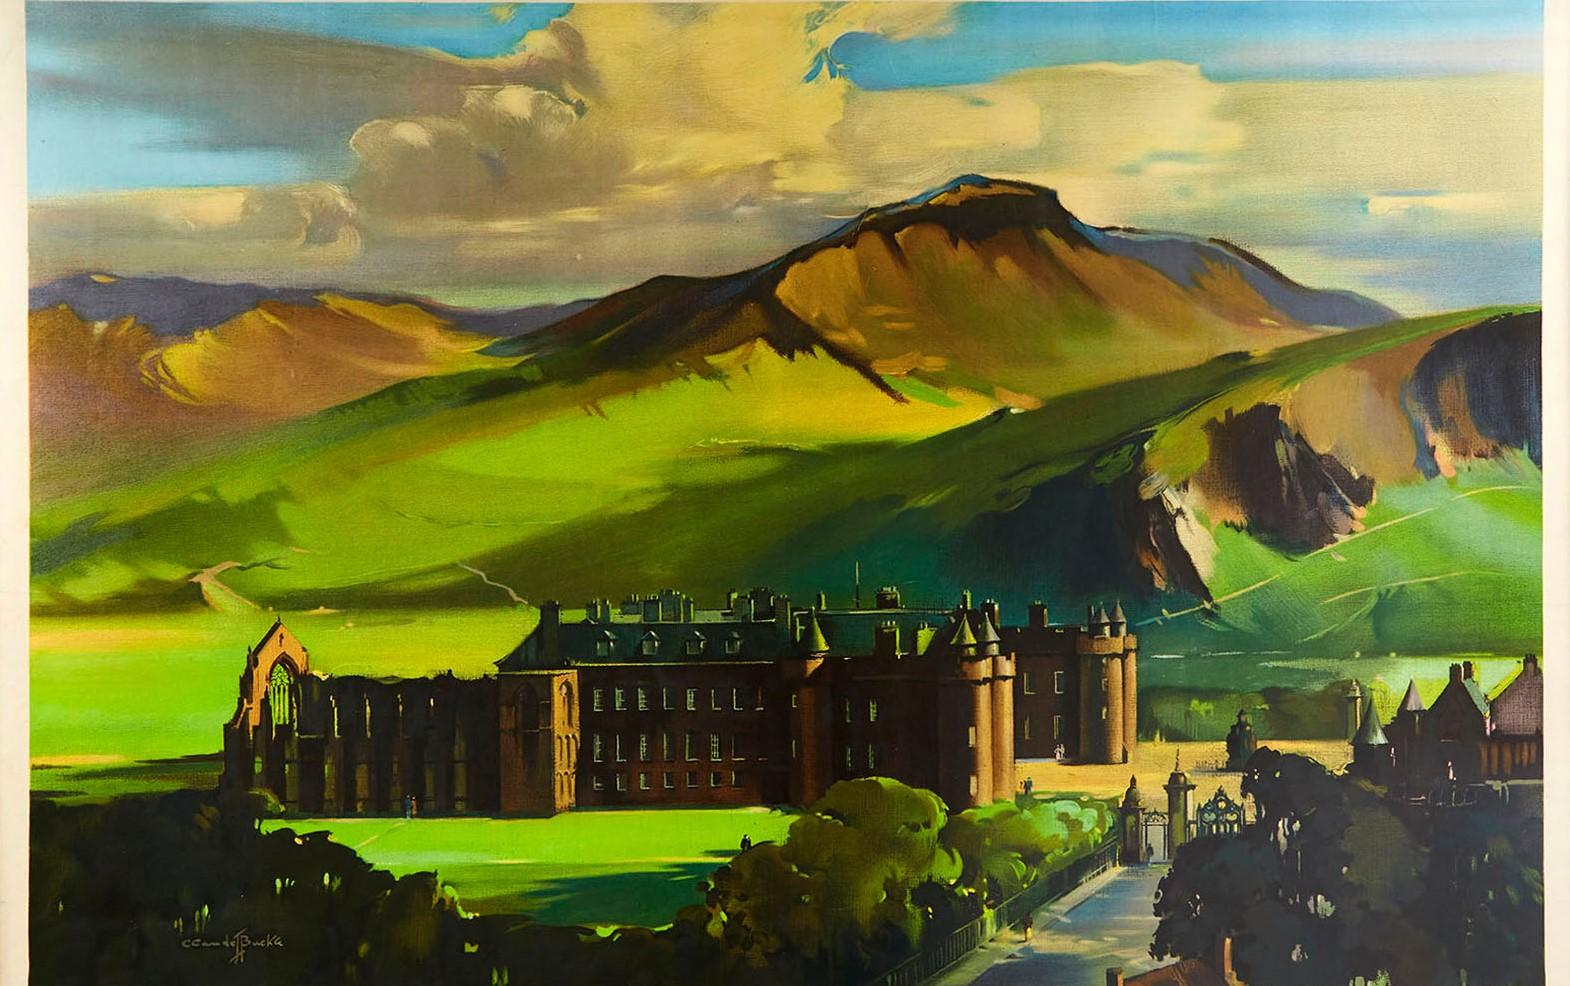 Original vintage British Railways poster - The Palace of Holyroodhouse Edinburgh See Britain By Train - featuring stunning artwork by the notable painter and poster artist Claude Buckle (1905-1973) of the historic 16th century Holyrood Palace and